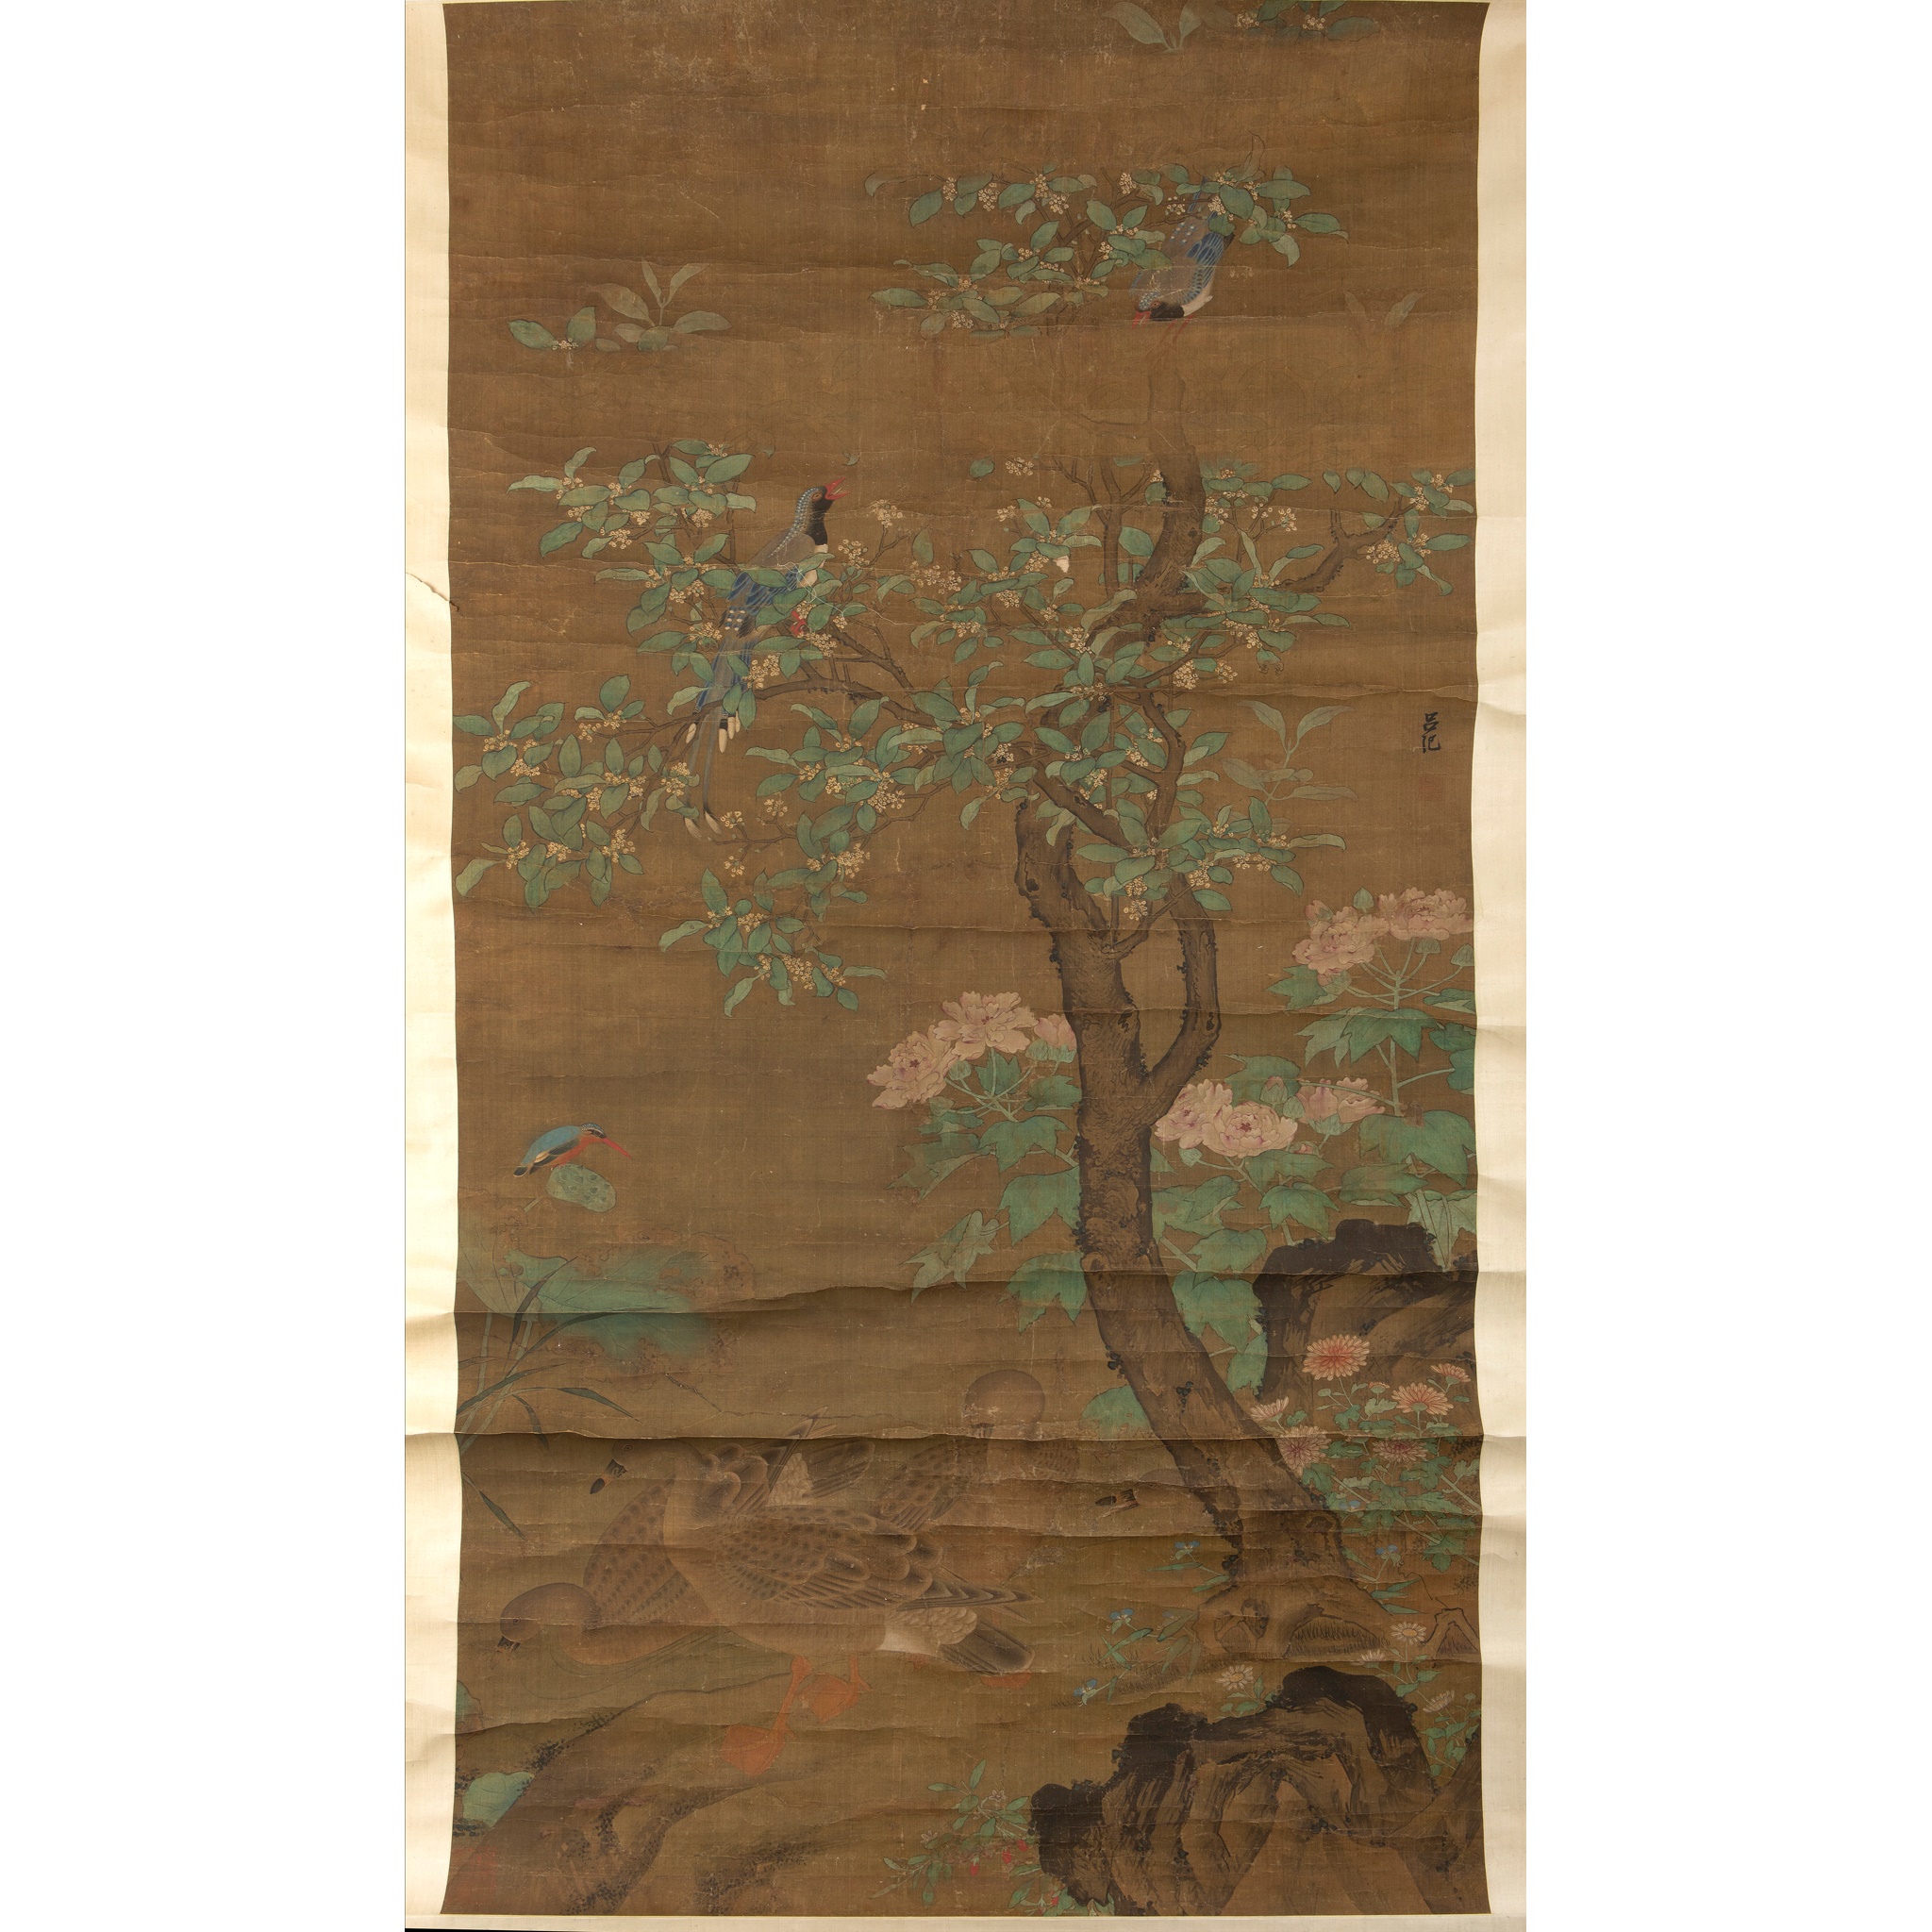 INK SCROLL PAINTING OF FLOWER AND WATERFOWLS ATTRIBUTED TO LU JI (1477-UNKNOWN) 明或以後 呂紀款 花卉水禽圖卷軸 絹本設色